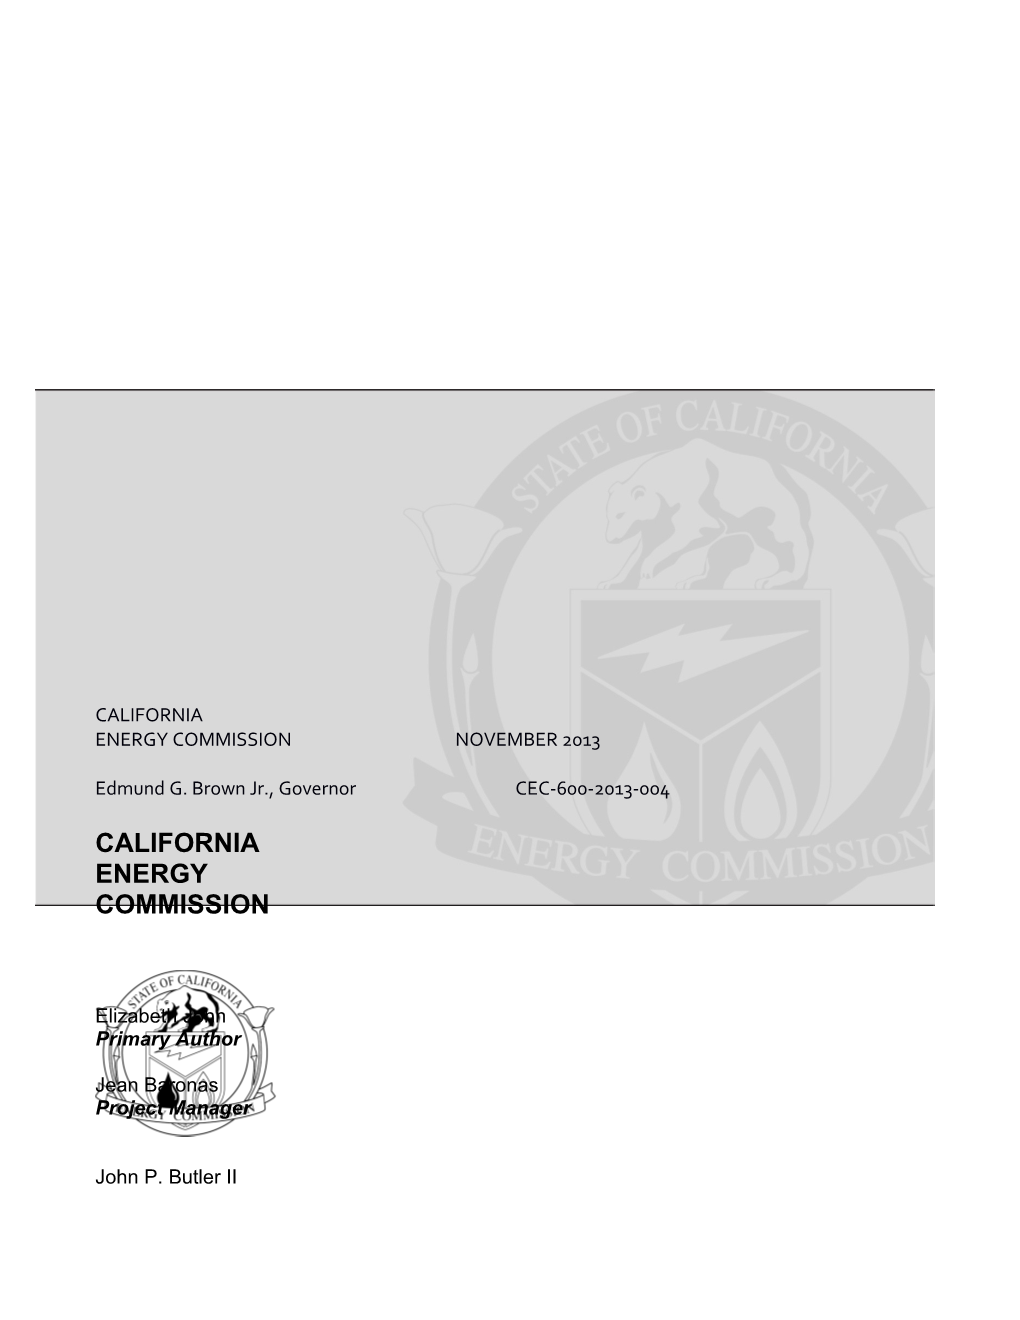 Style Manual (Second Edition) for California Energy Commission Staff, Committee, and Commission